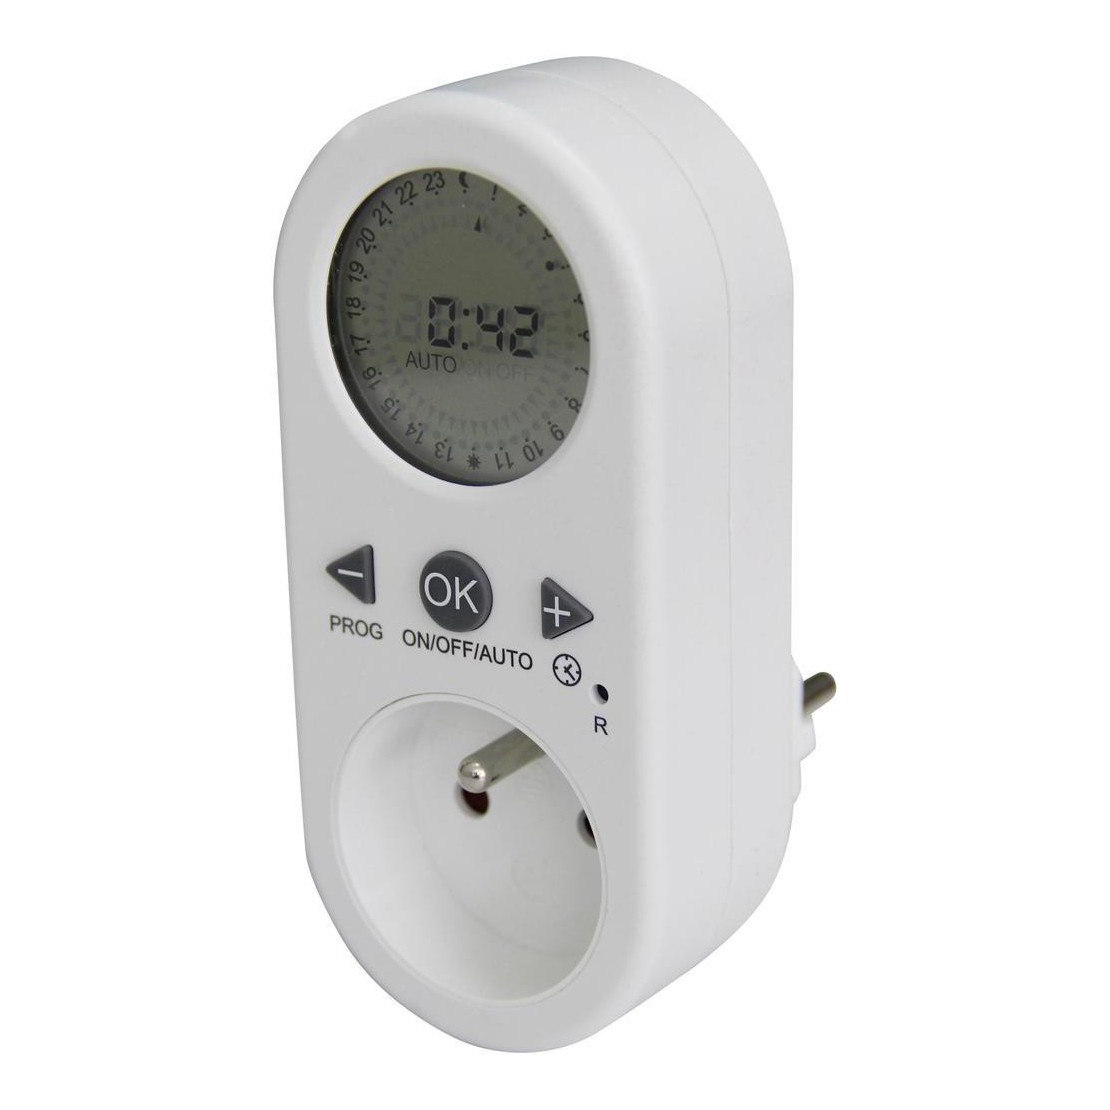 Digital timer with large LCD